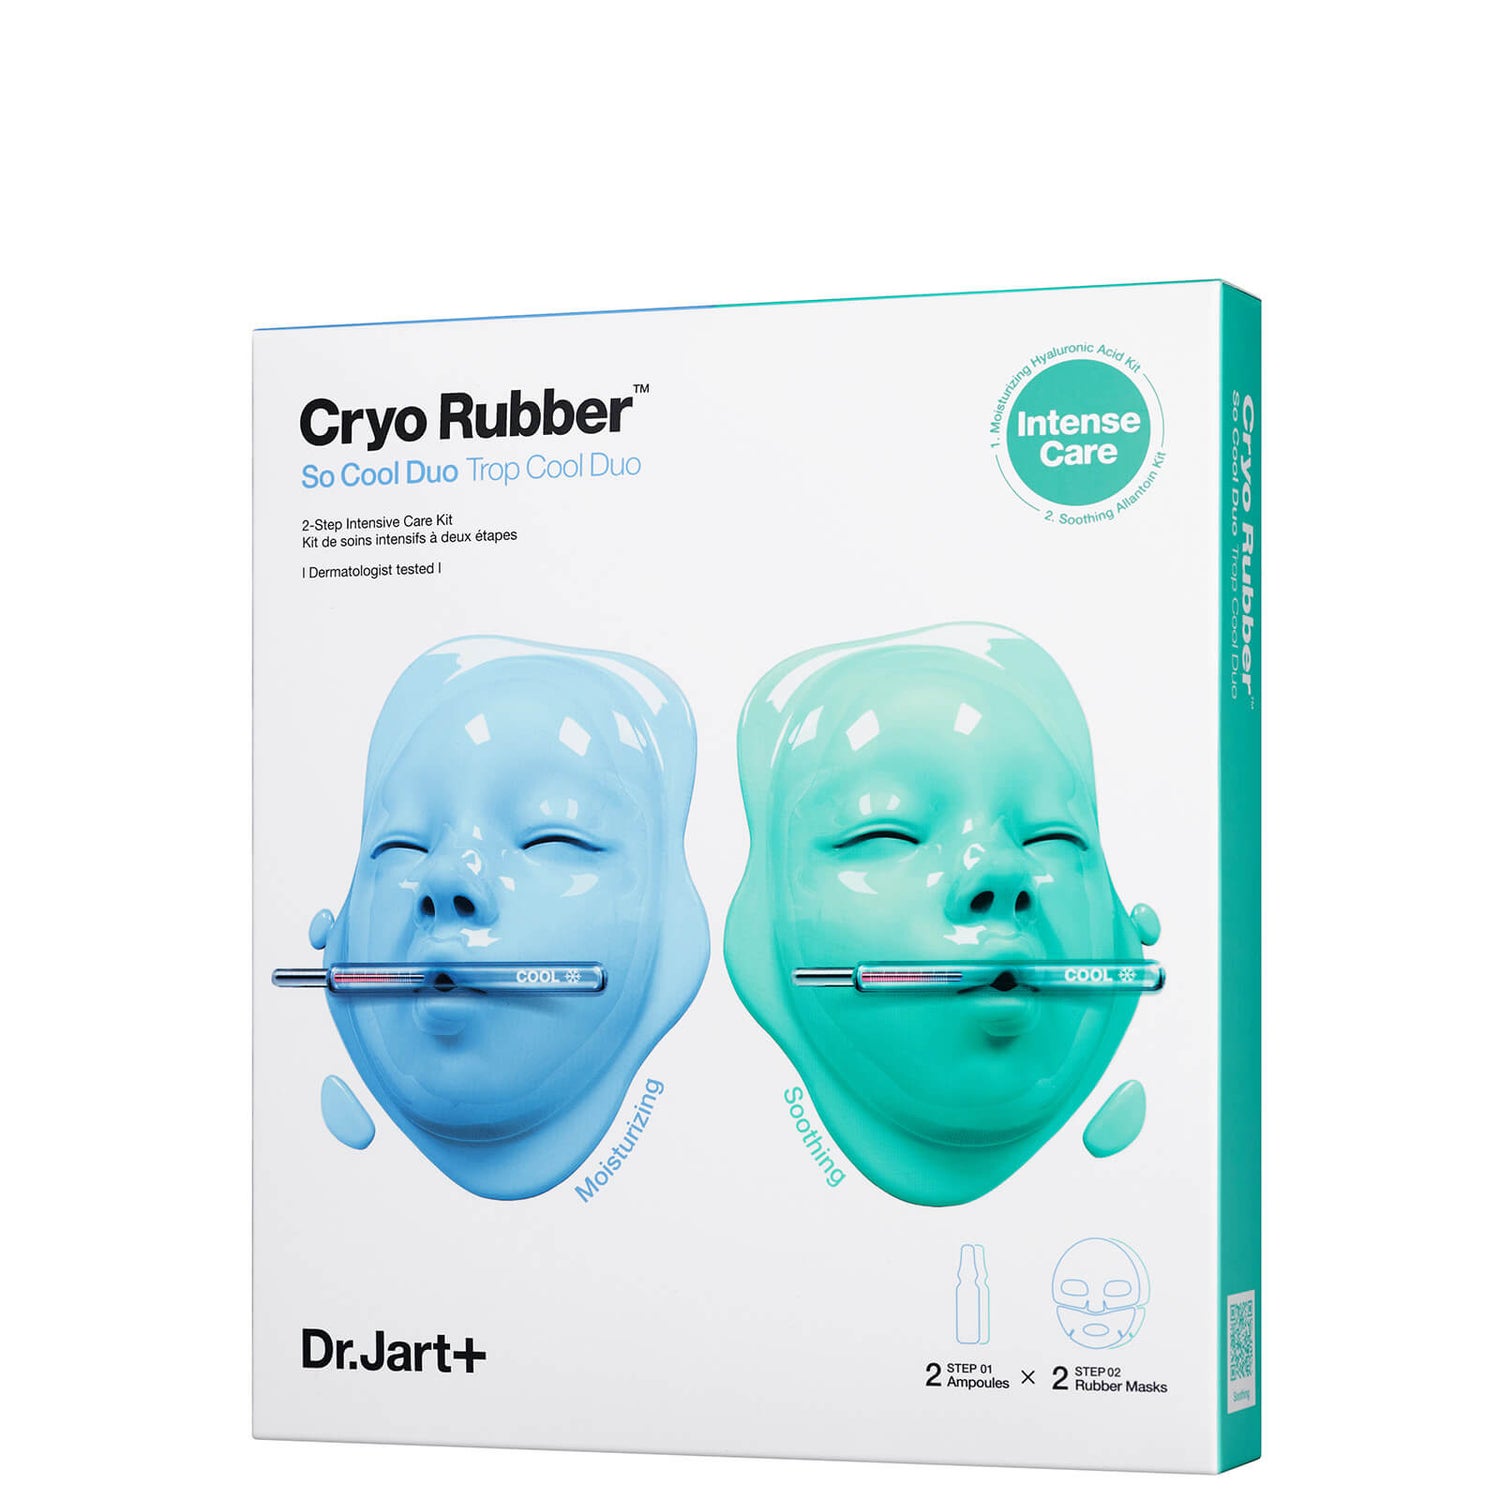 Dr.Jart+ Cryo Rubber So Cool Mask Duo